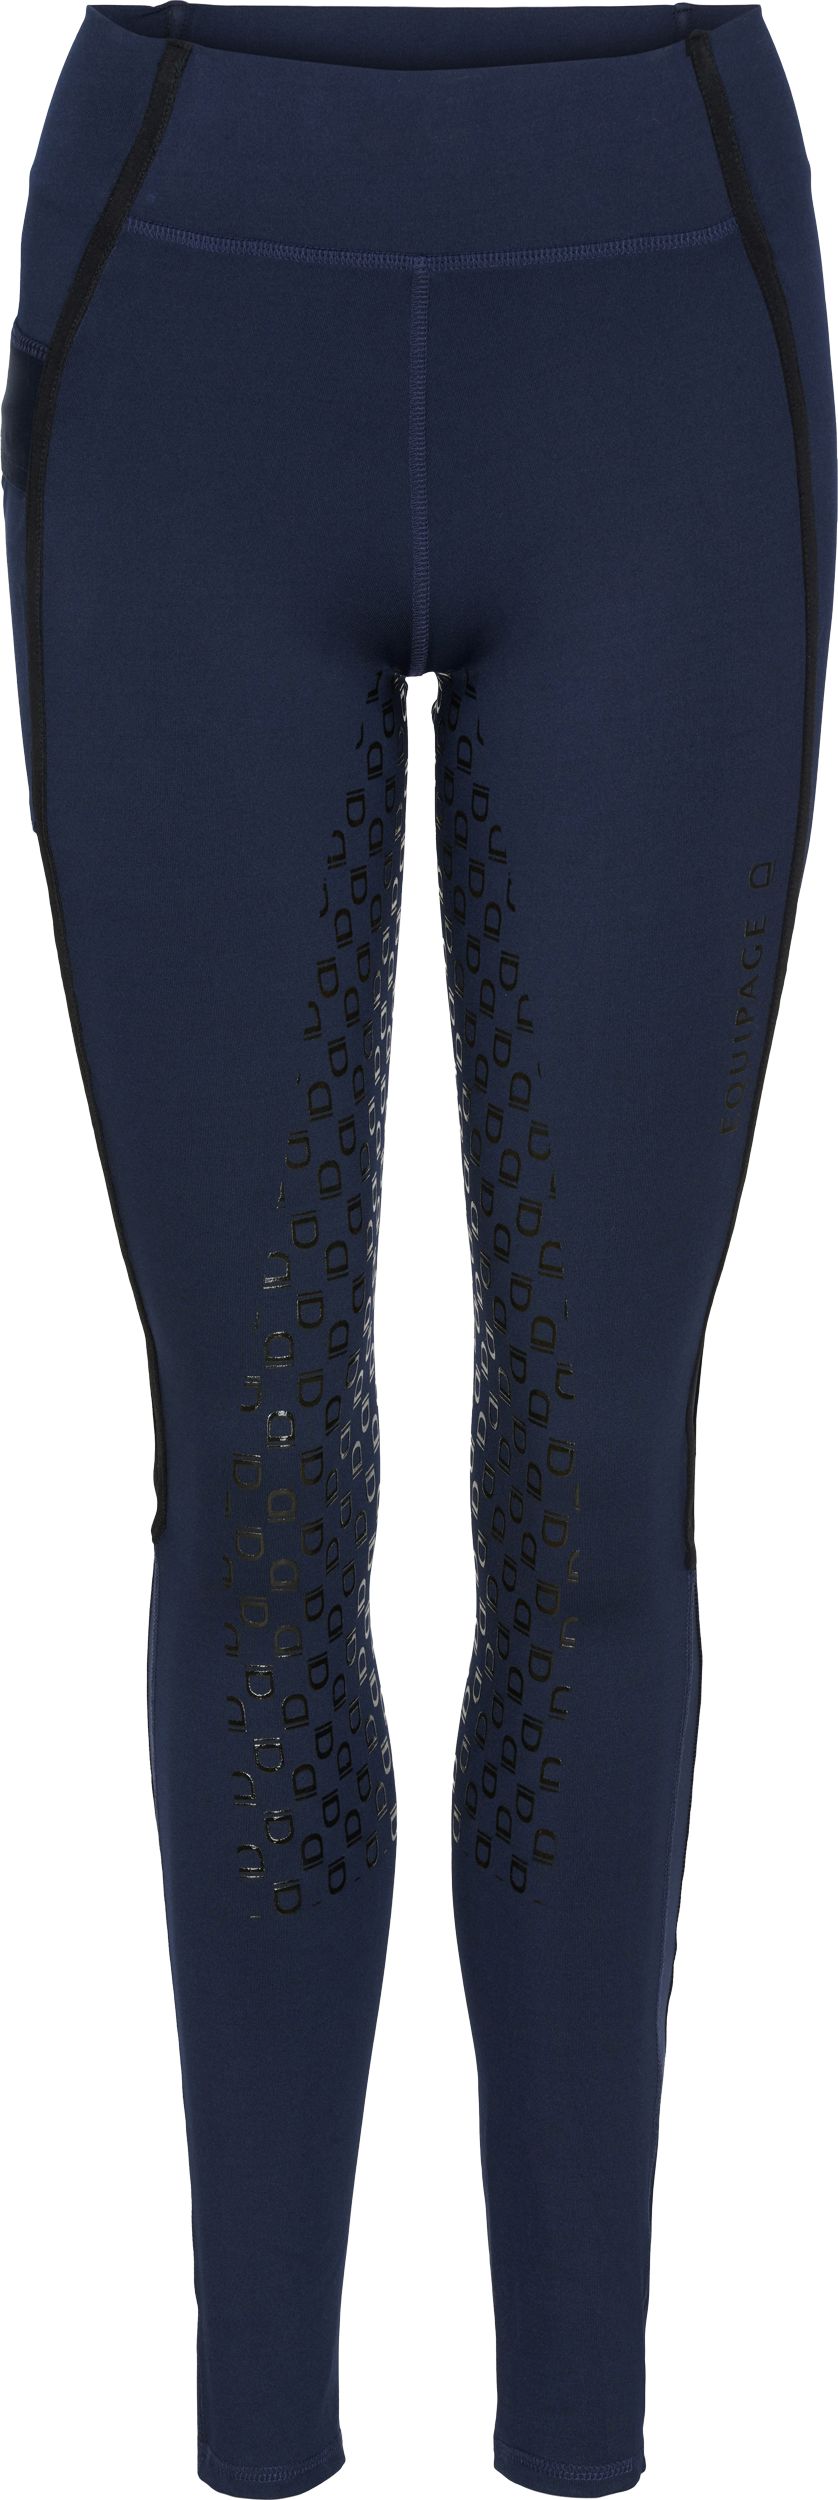 EQUIPAGE, FINLEY F/G TIGHTS SR